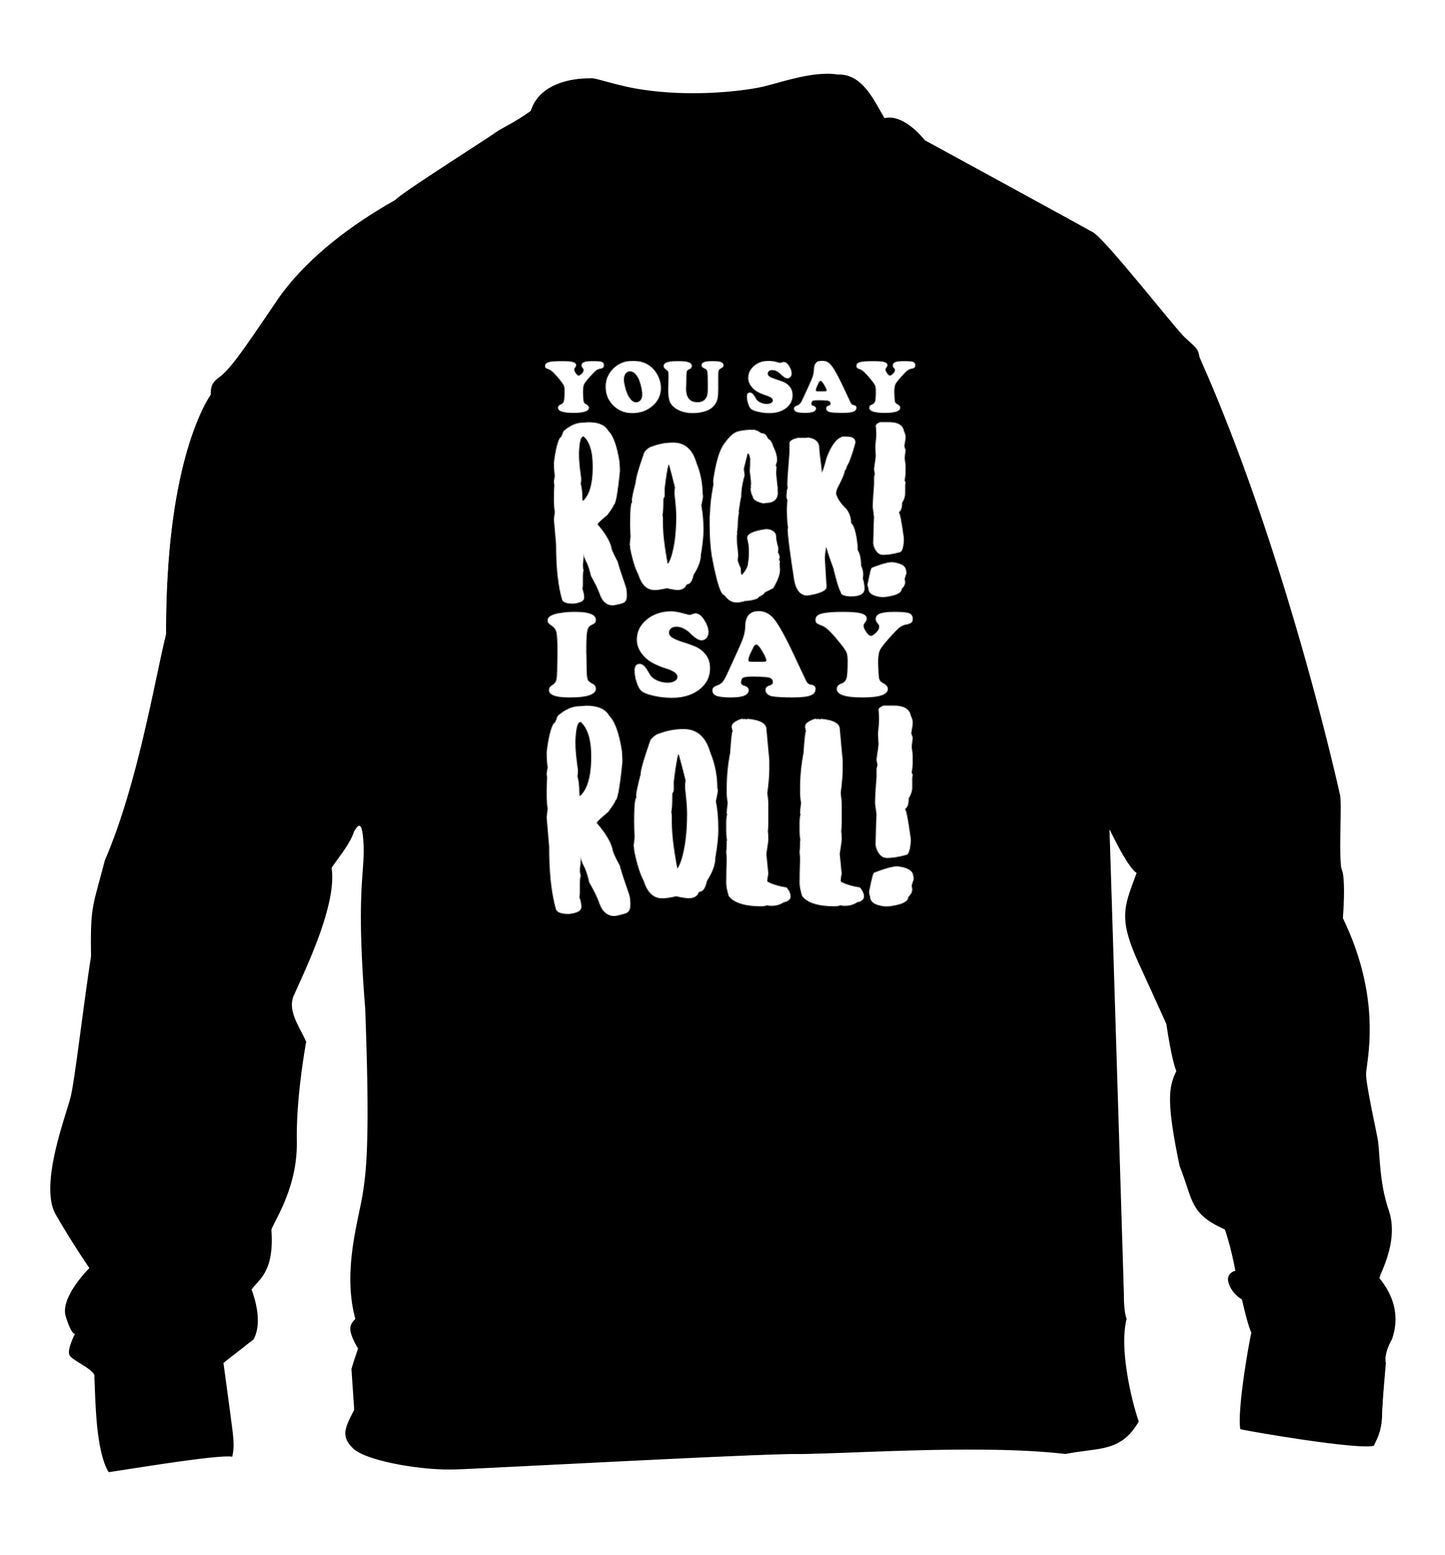 You say rock I say roll! children's black sweater 12-14 Years